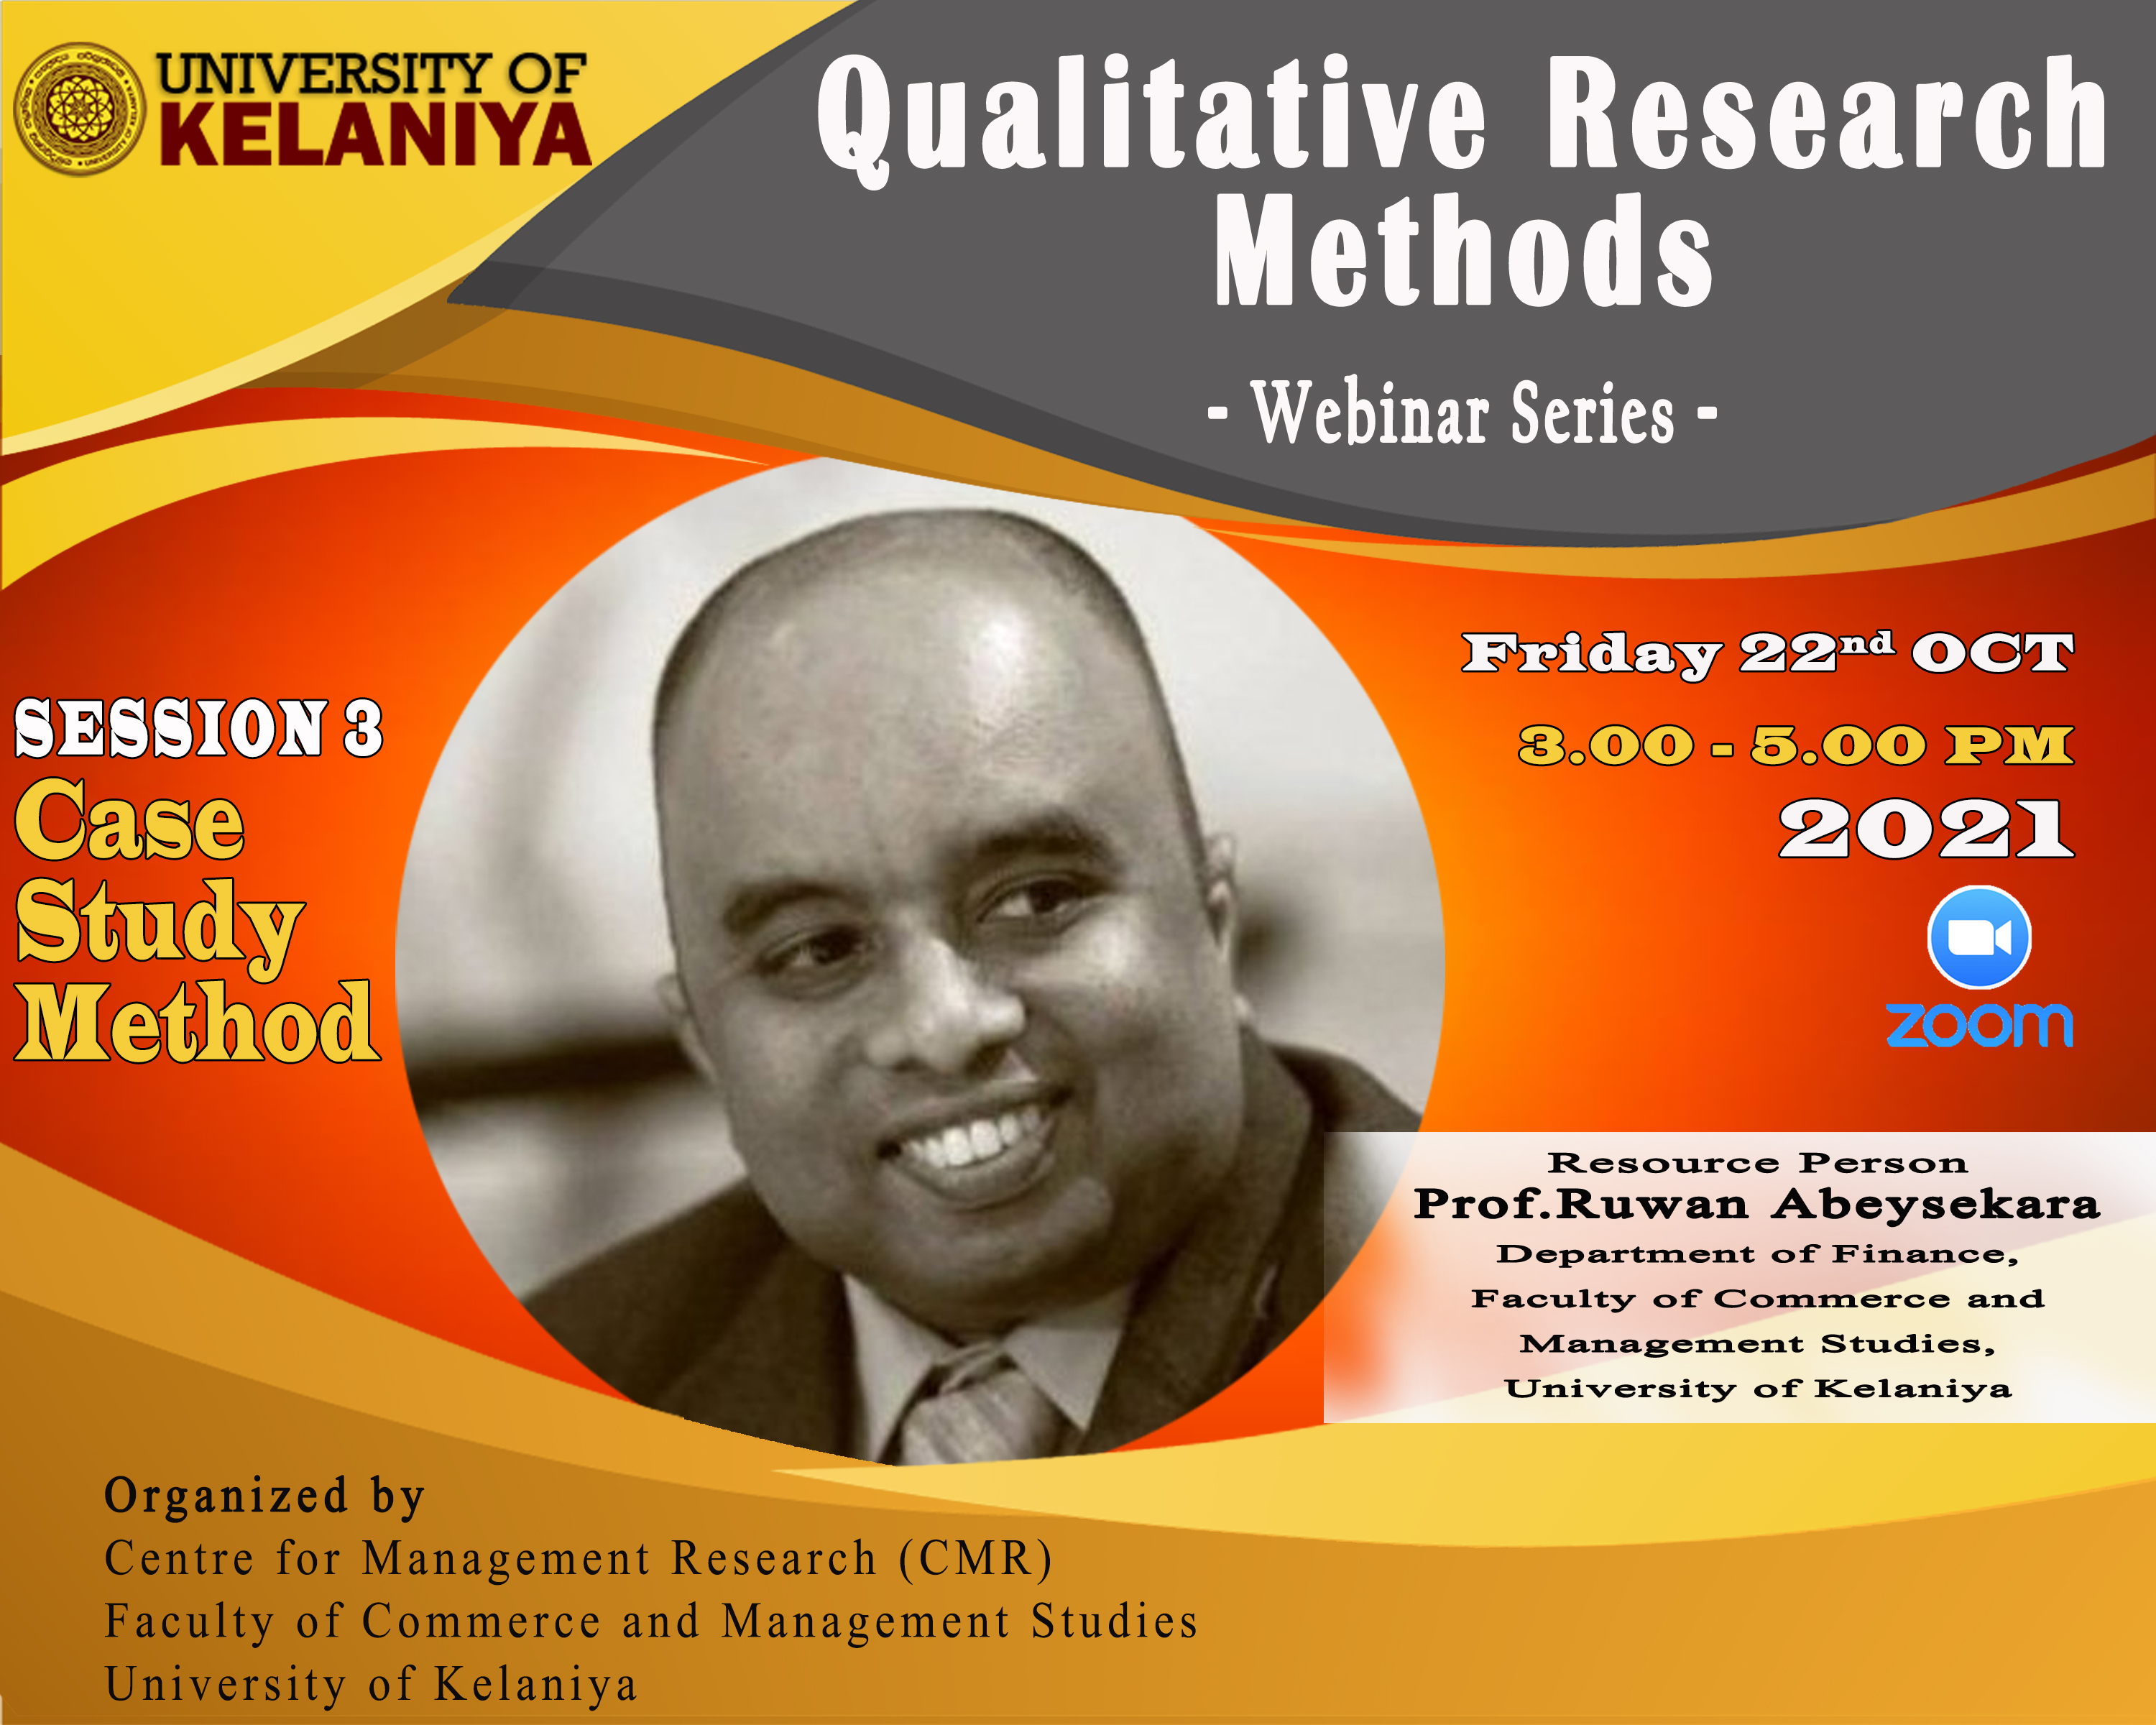 Qualitative Research Methods - Session 3